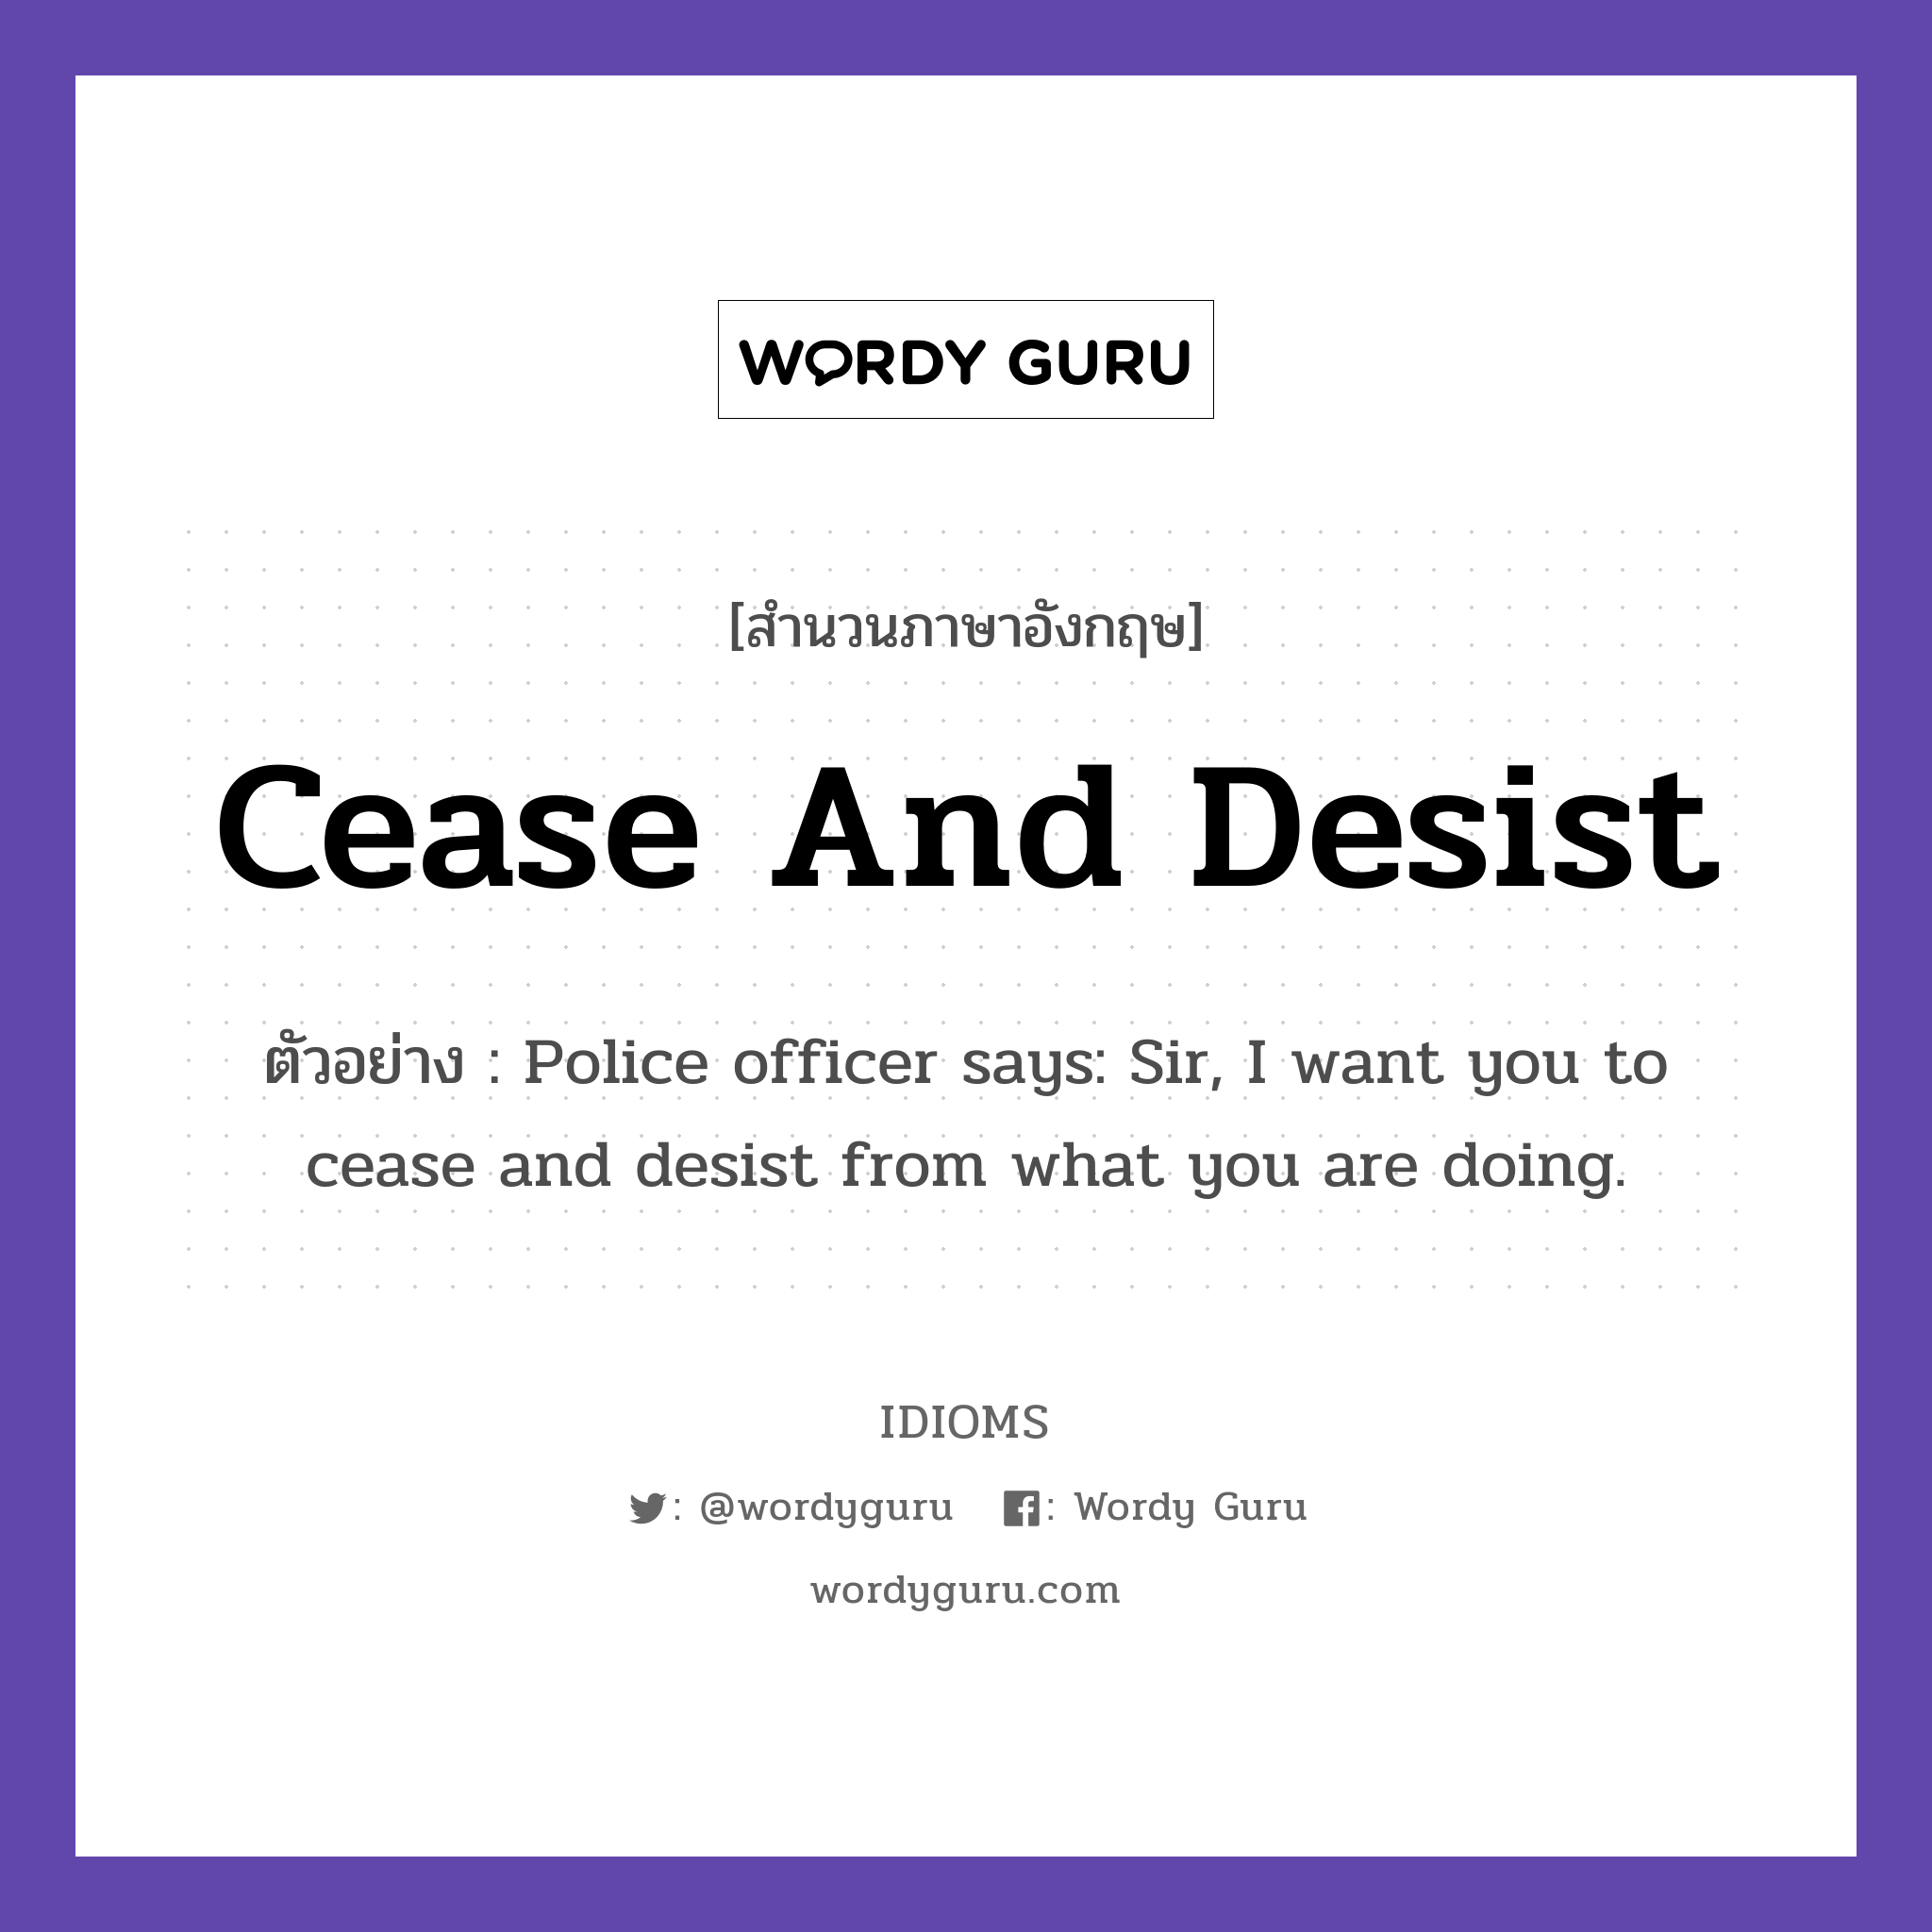 Cease And Desist แปลว่า?, สำนวนภาษาอังกฤษ Cease And Desist ตัวอย่าง Police officer says: Sir, I want you to cease and desist from what you are doing.